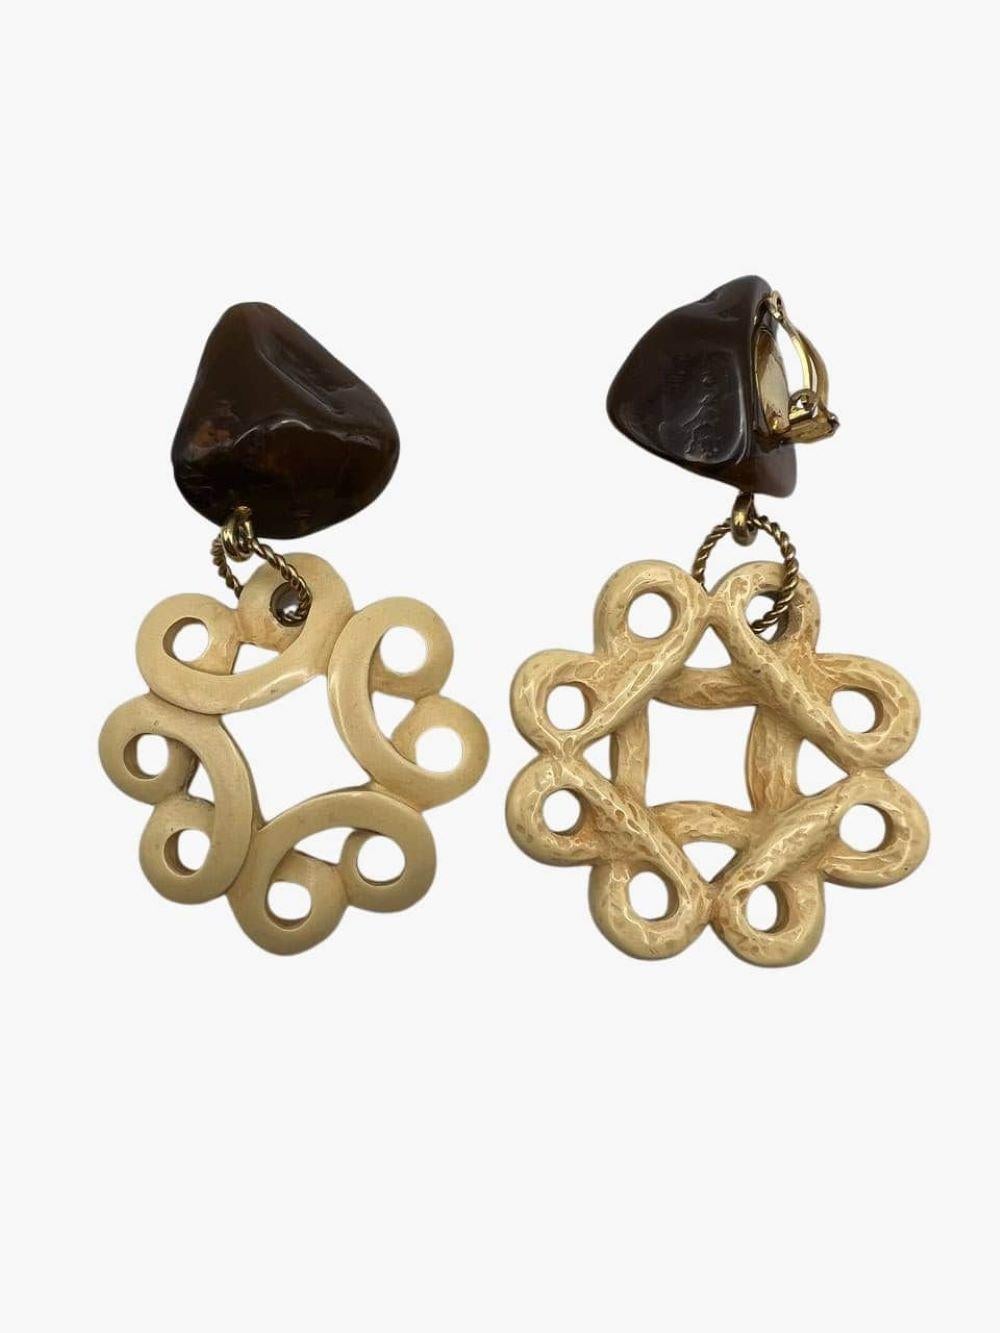 Vintage massive ivory and dark-brown resin drop earrings by Yves Saint Laurent. Features openwork dangling circles. 
Gold-tone metal clip-on closure. 
Signed. YSL mark on the clasp. 
Year: 1967 (SS67 African Collection)
Length: 8cm
Width: 5cm